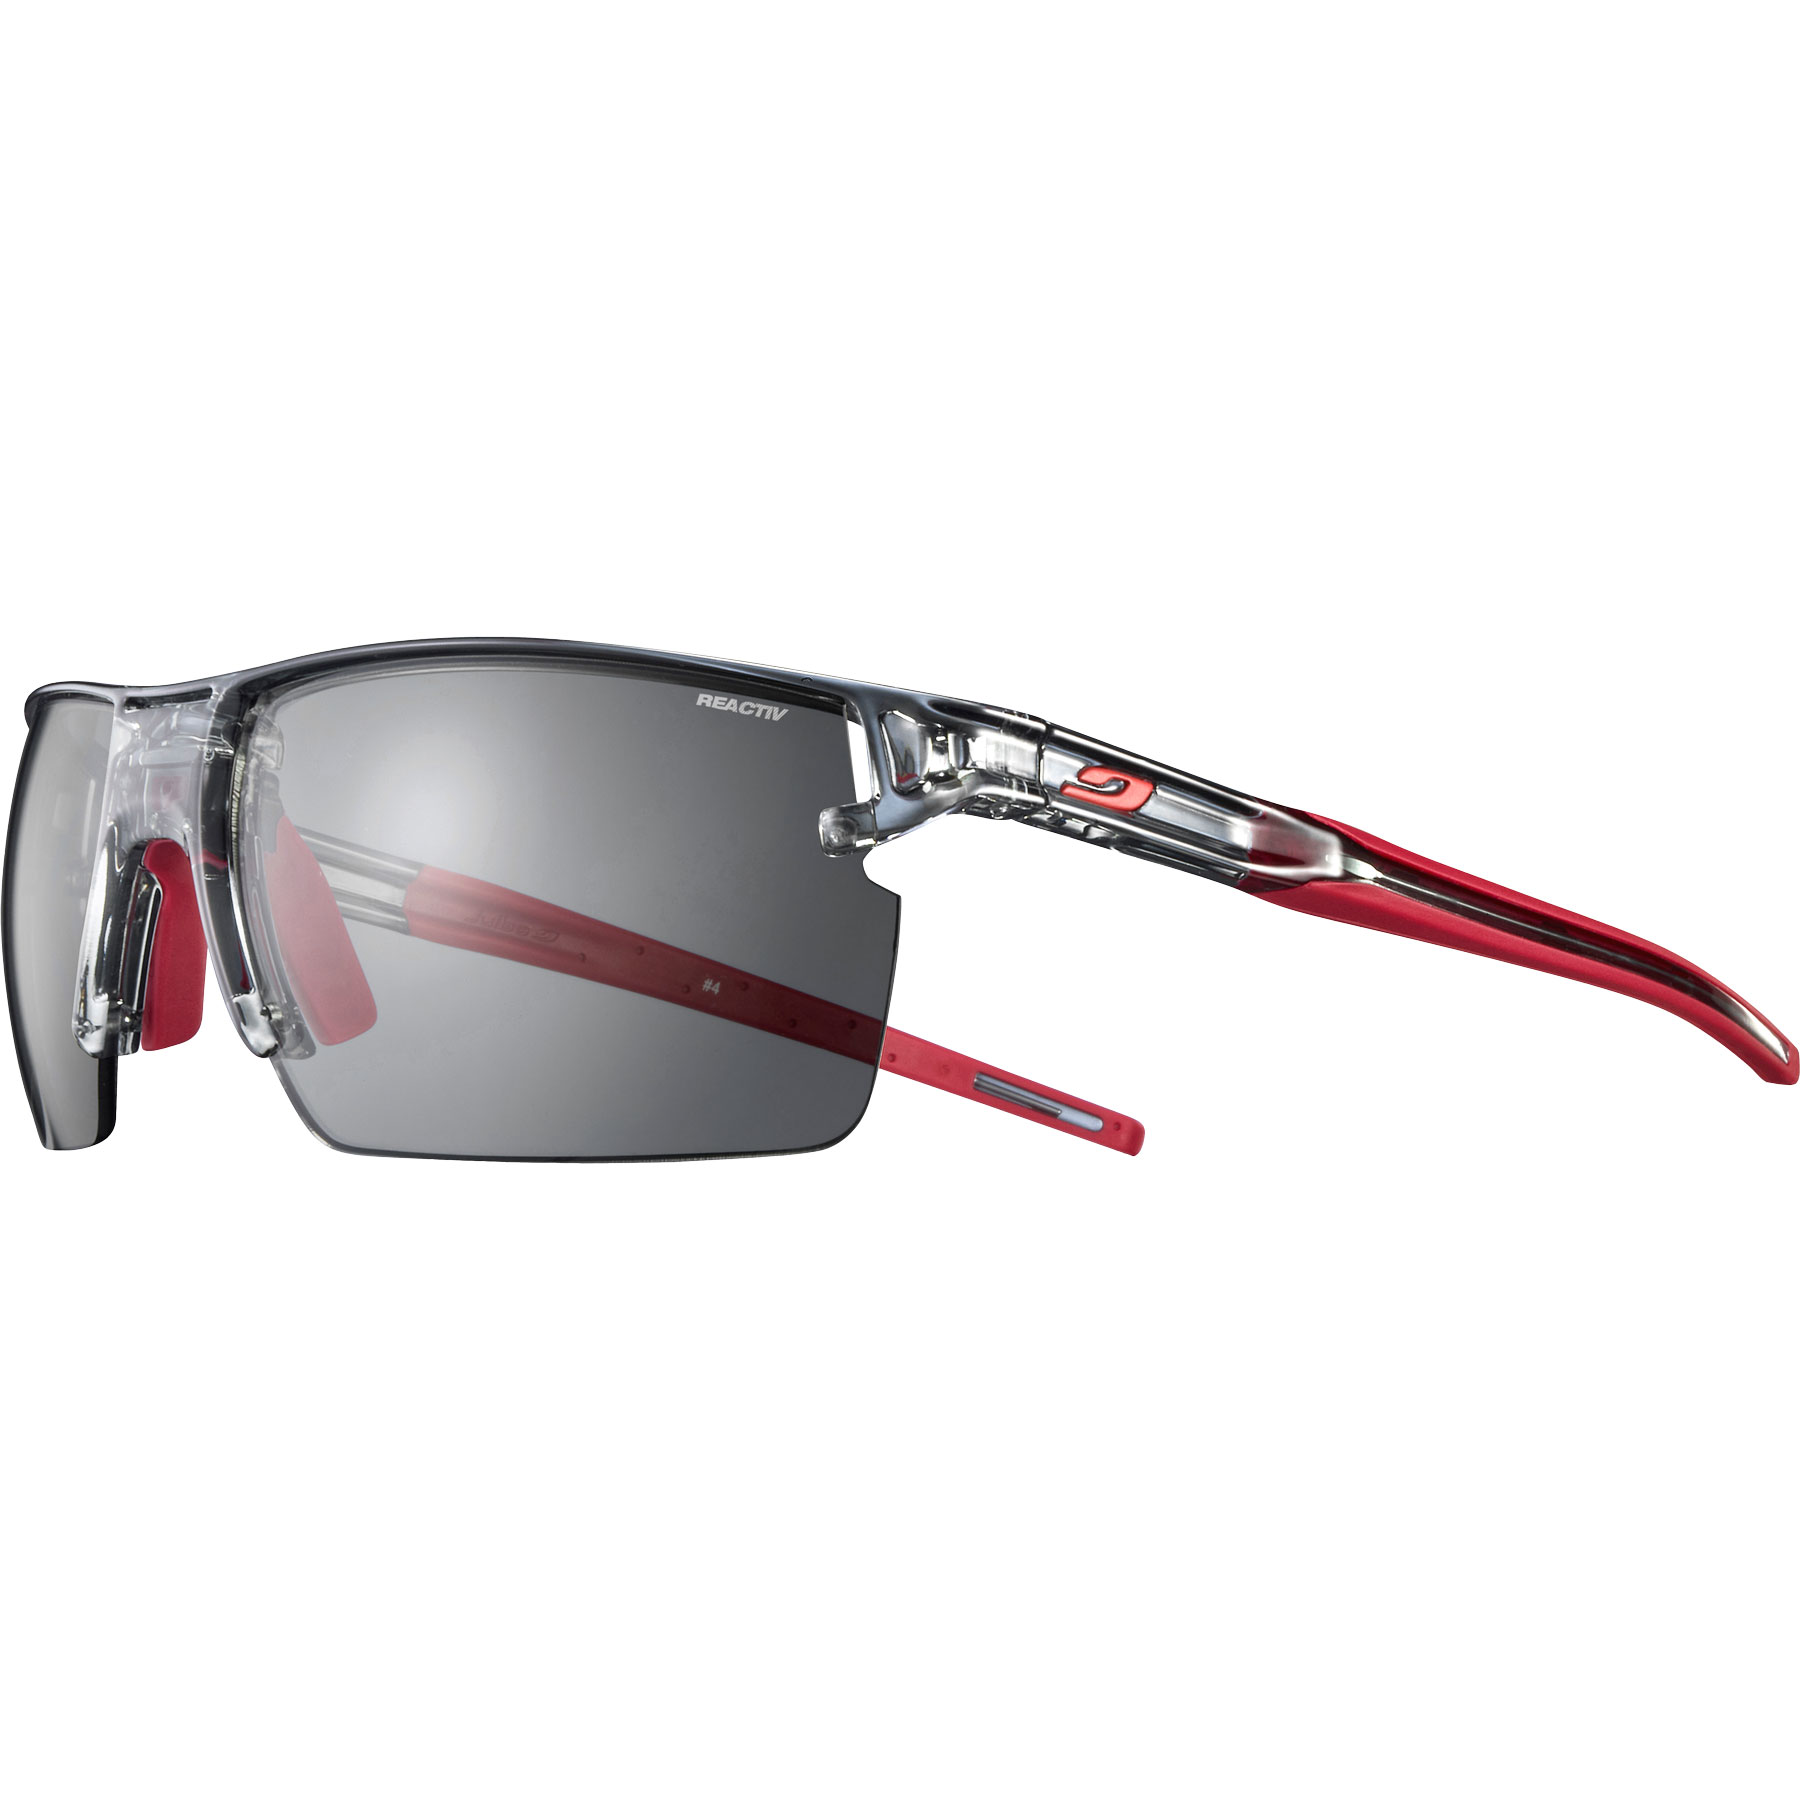 Image of Julbo Outline Reactiv Performance 0-3 Sunglasses - Black Red / Clear